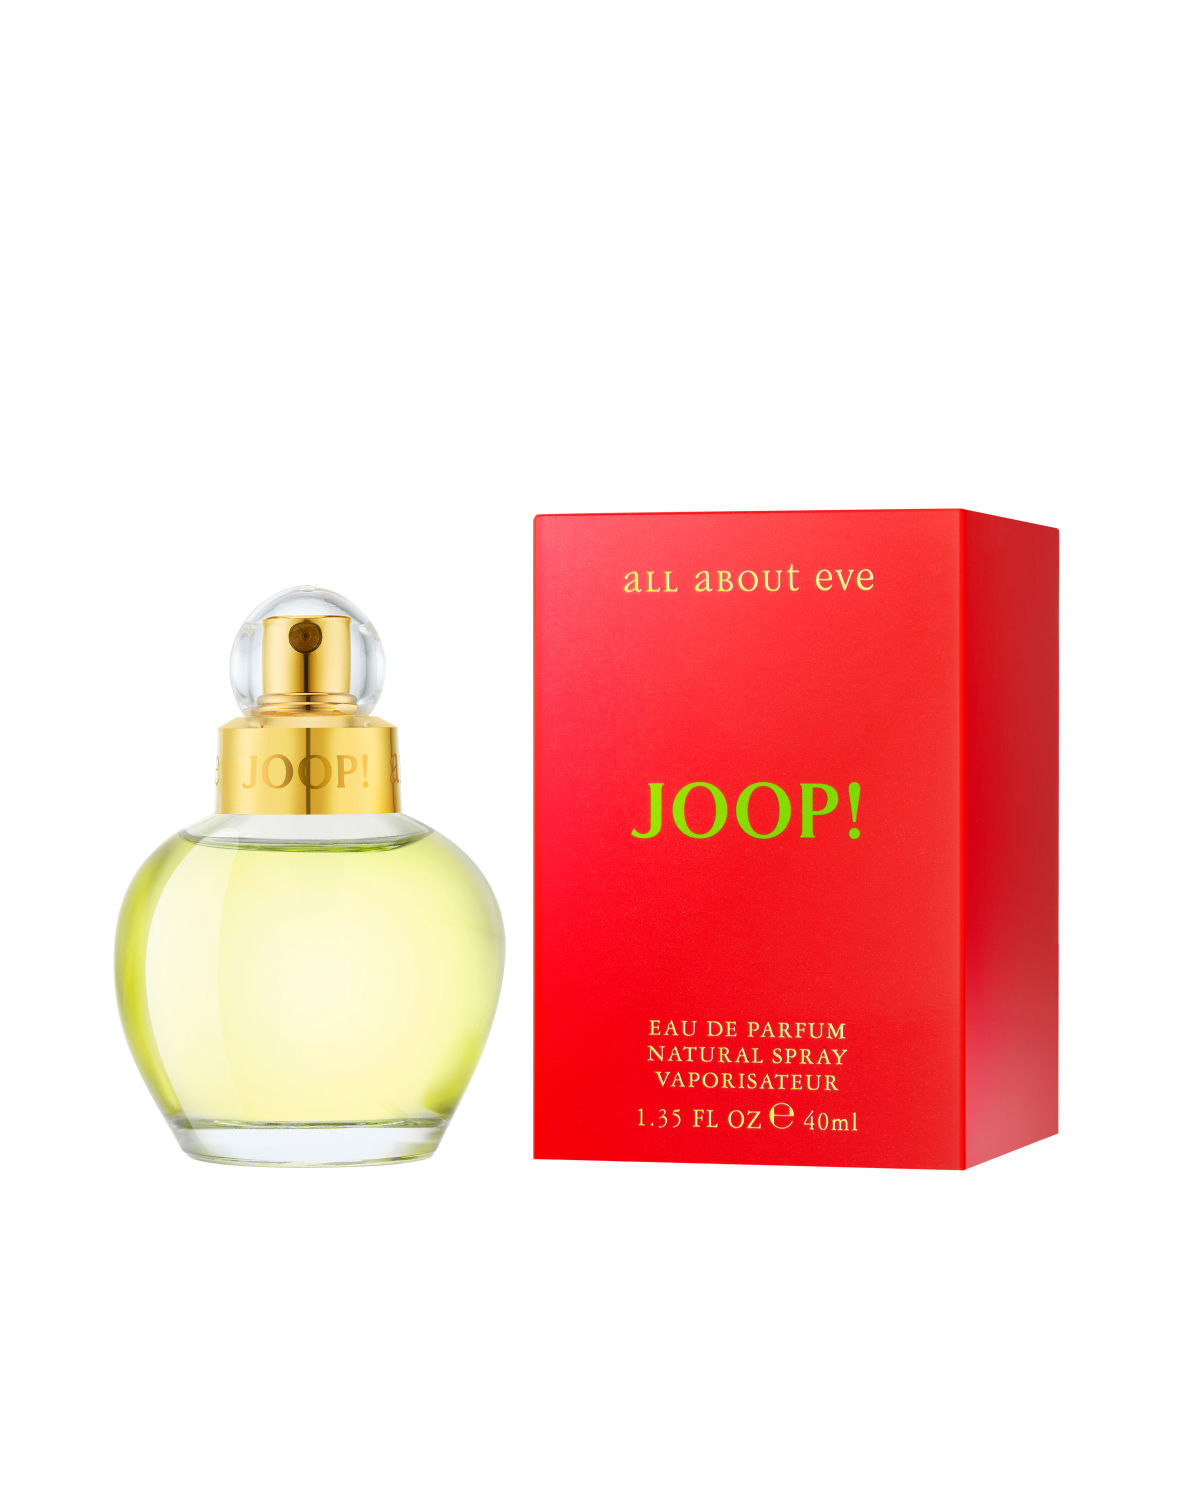 All About Eve - Joop! - 40 ml - edp